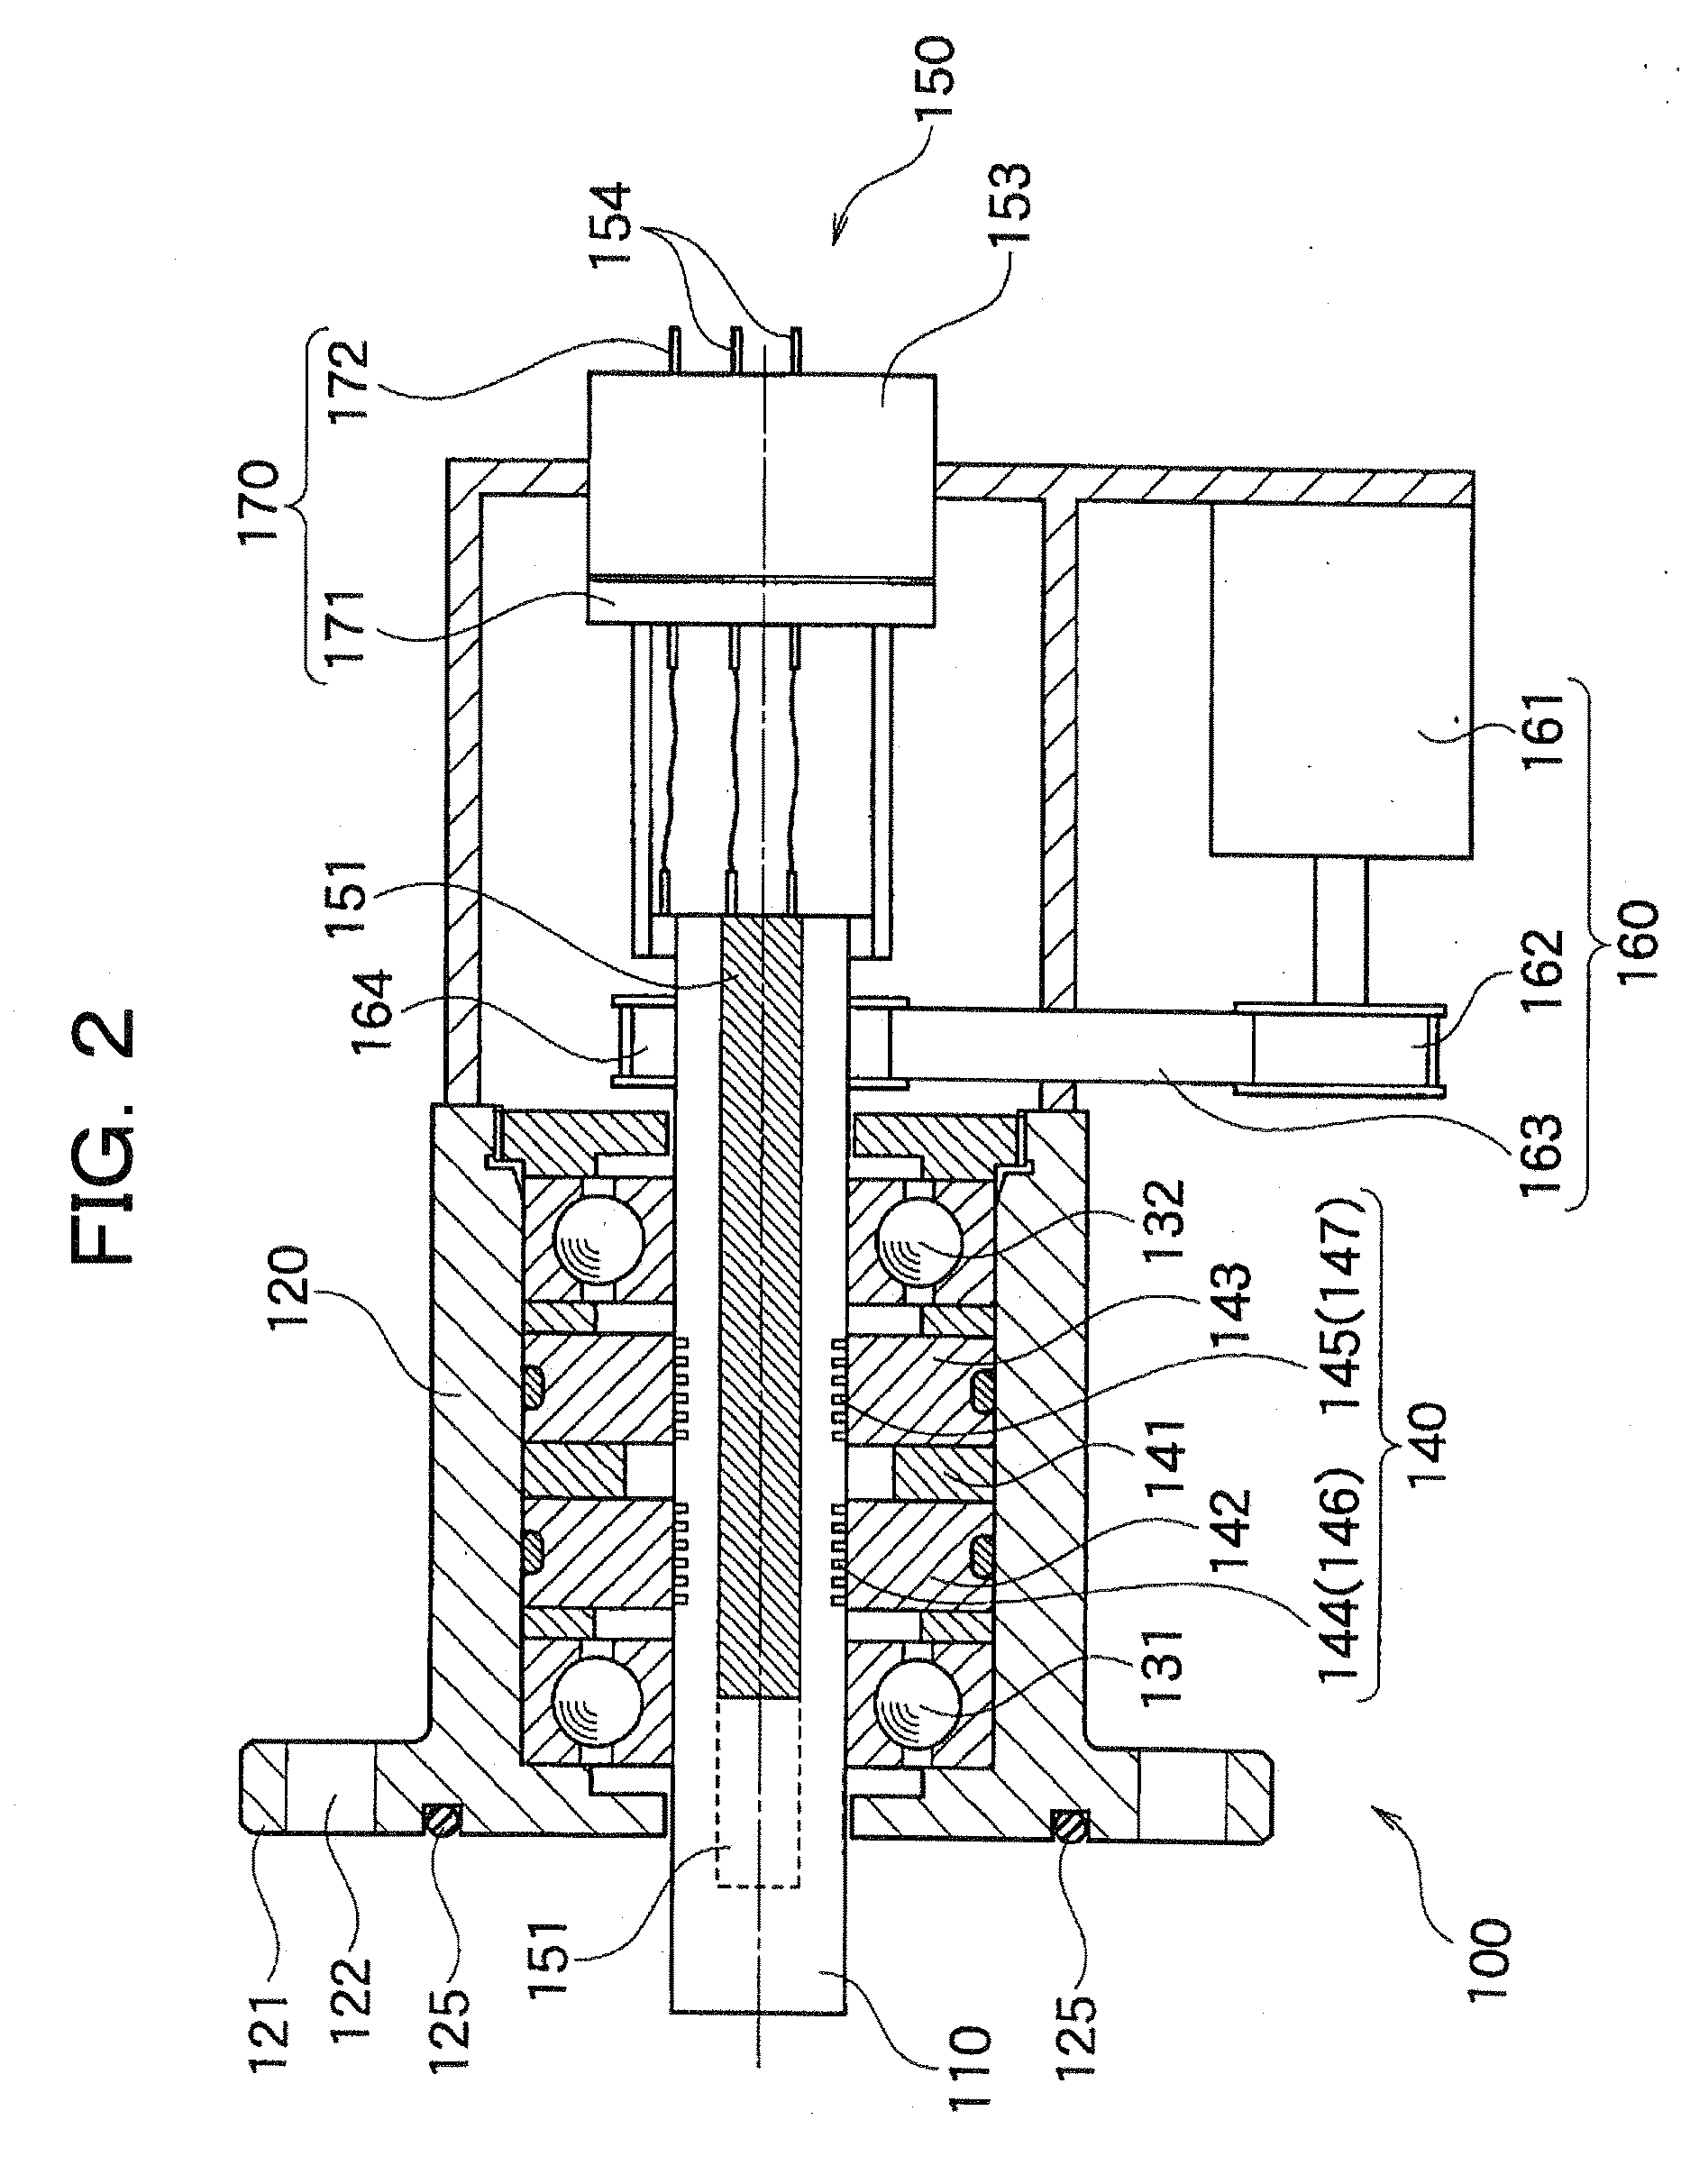 Magnetic fluid seal device